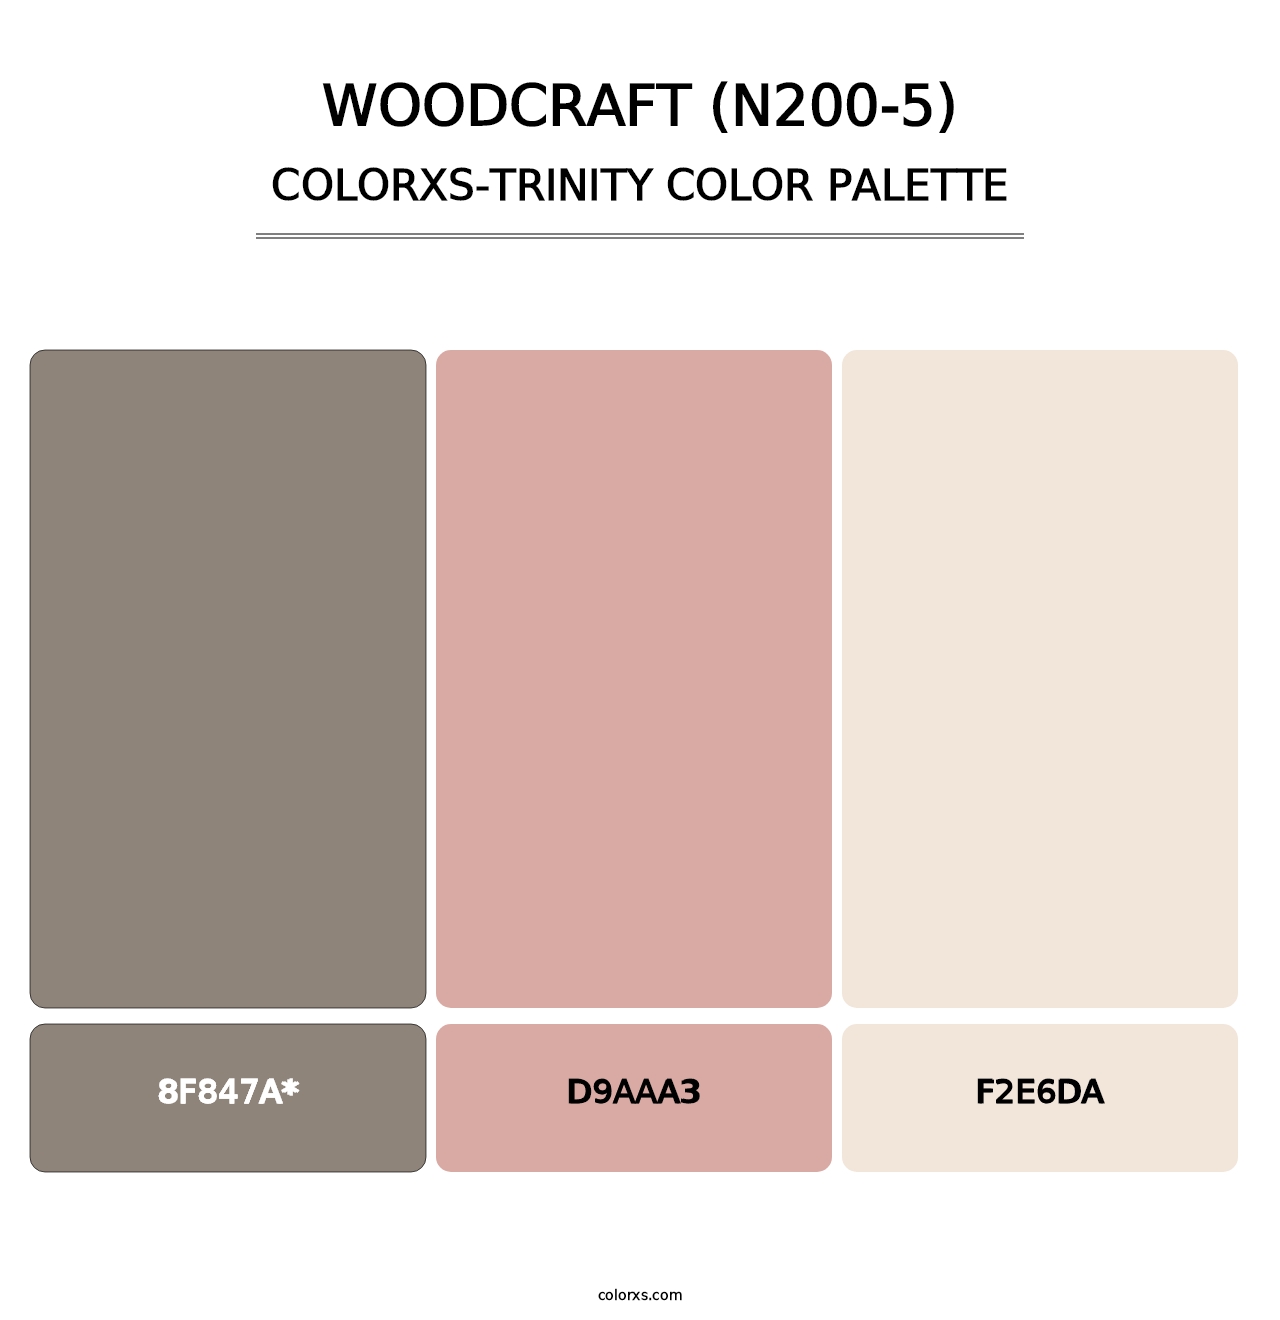 Woodcraft (N200-5) - Colorxs Trinity Palette